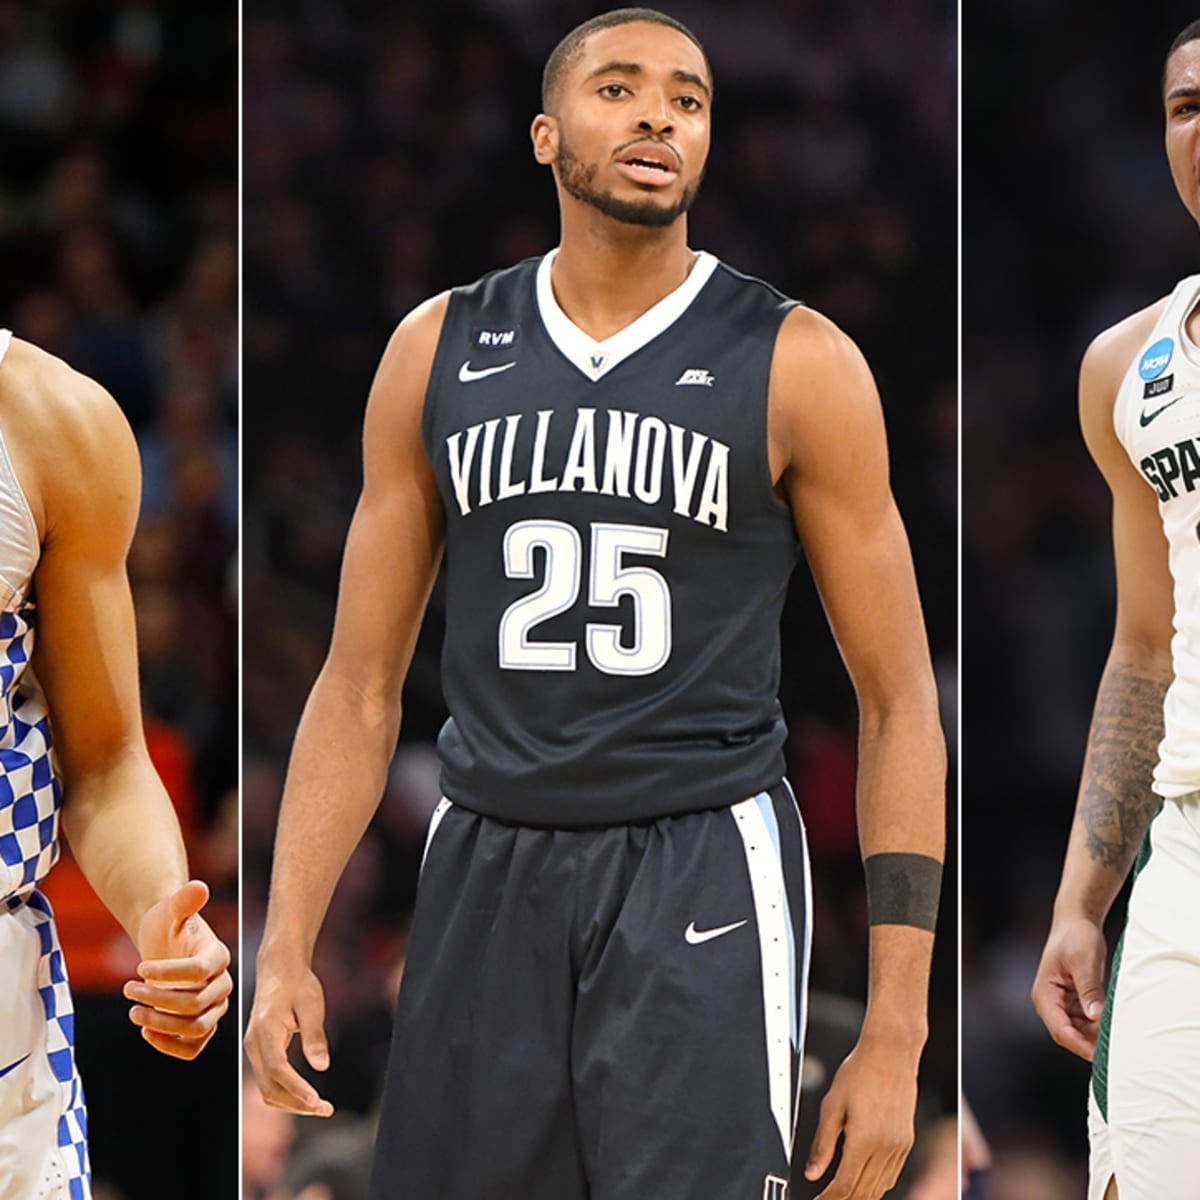 Ncaawildcats Mikal Bridges Could Be Translated To Spanish As 